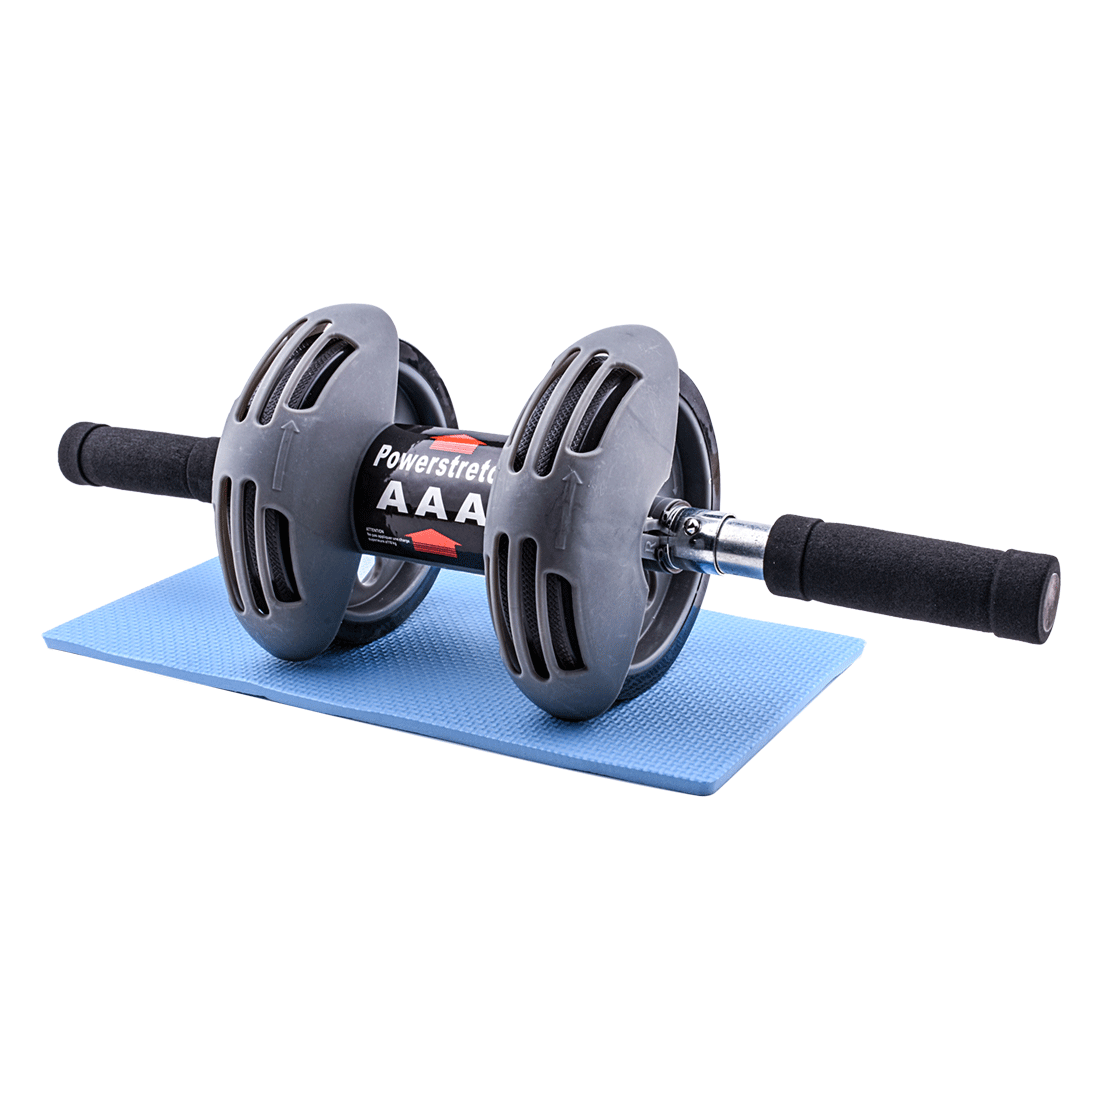 AB Power Roller Wheels Workout Equipment Gym Equipment Exercise Machine Abdominal Muscle Health and Fitness for Home Training